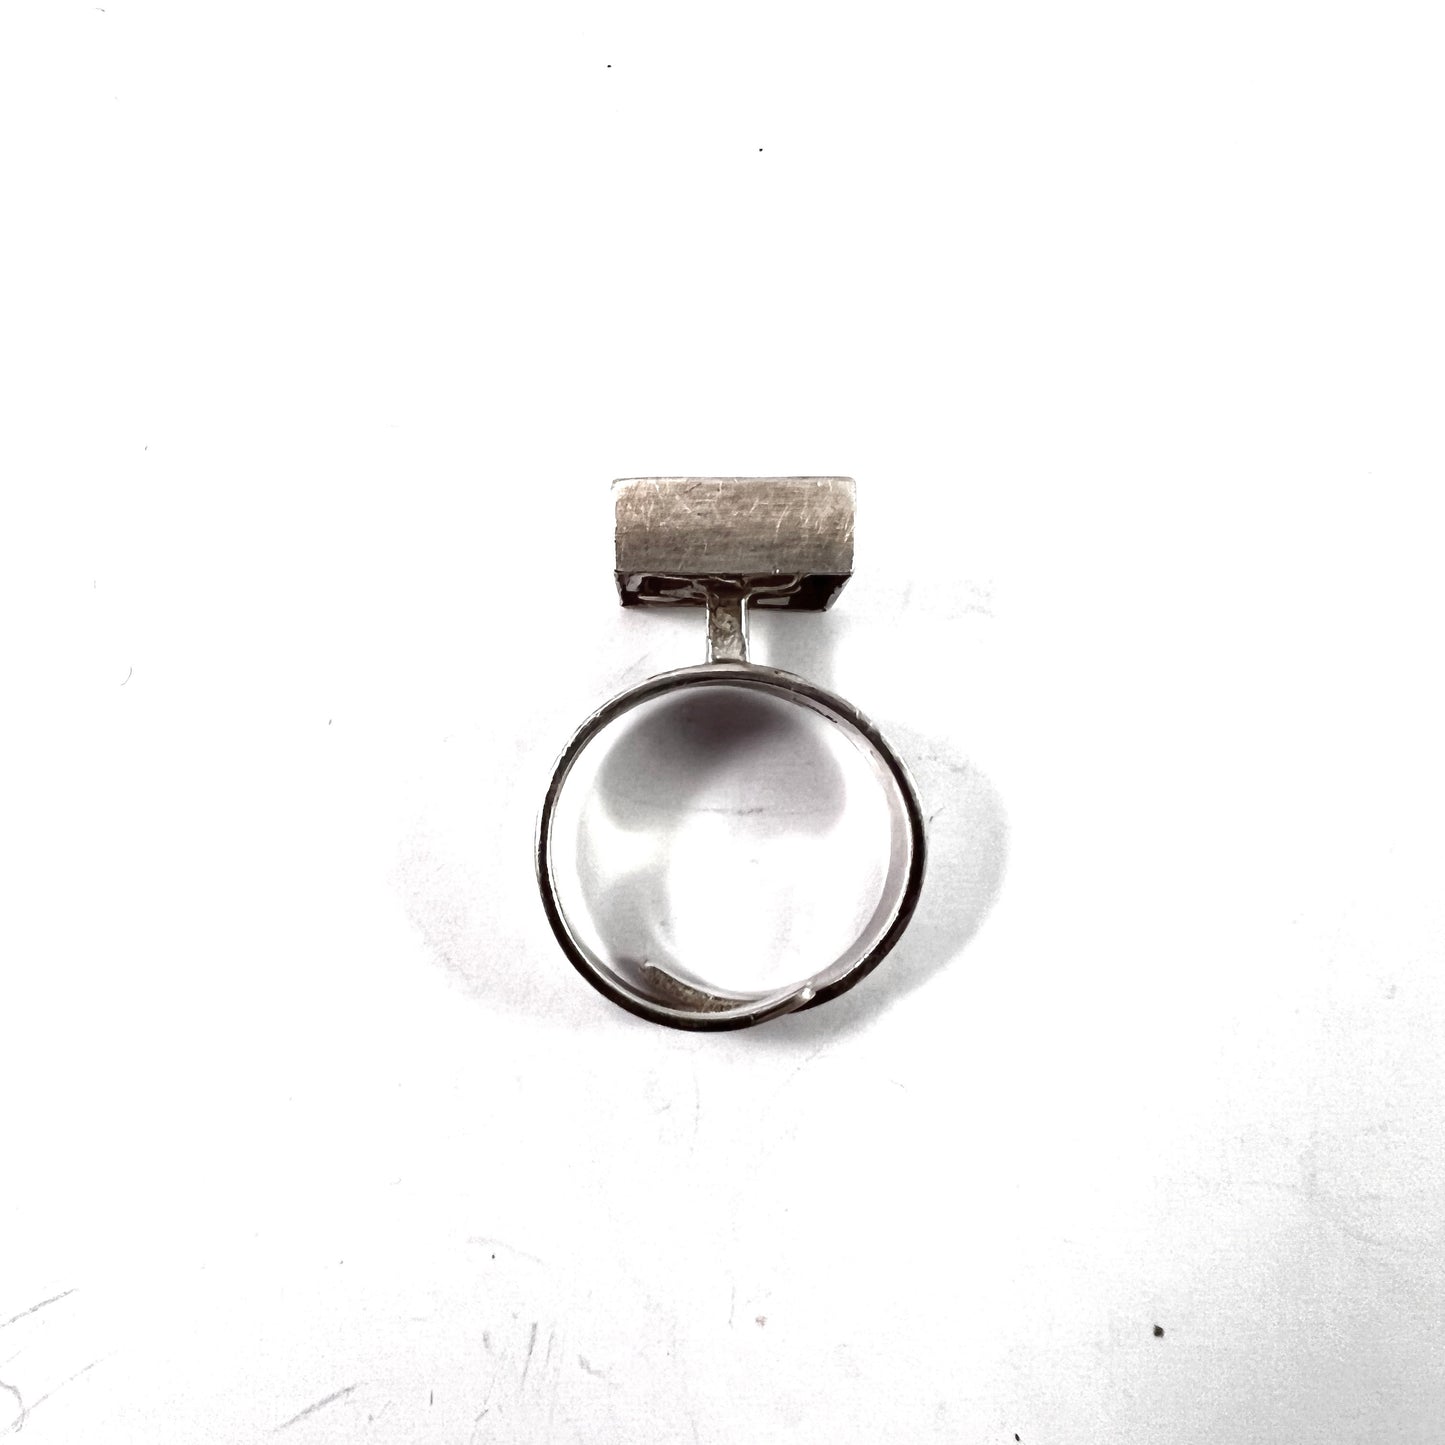 Esa Lukala, Finland 1970s. Solid Silver Ring. Signed.